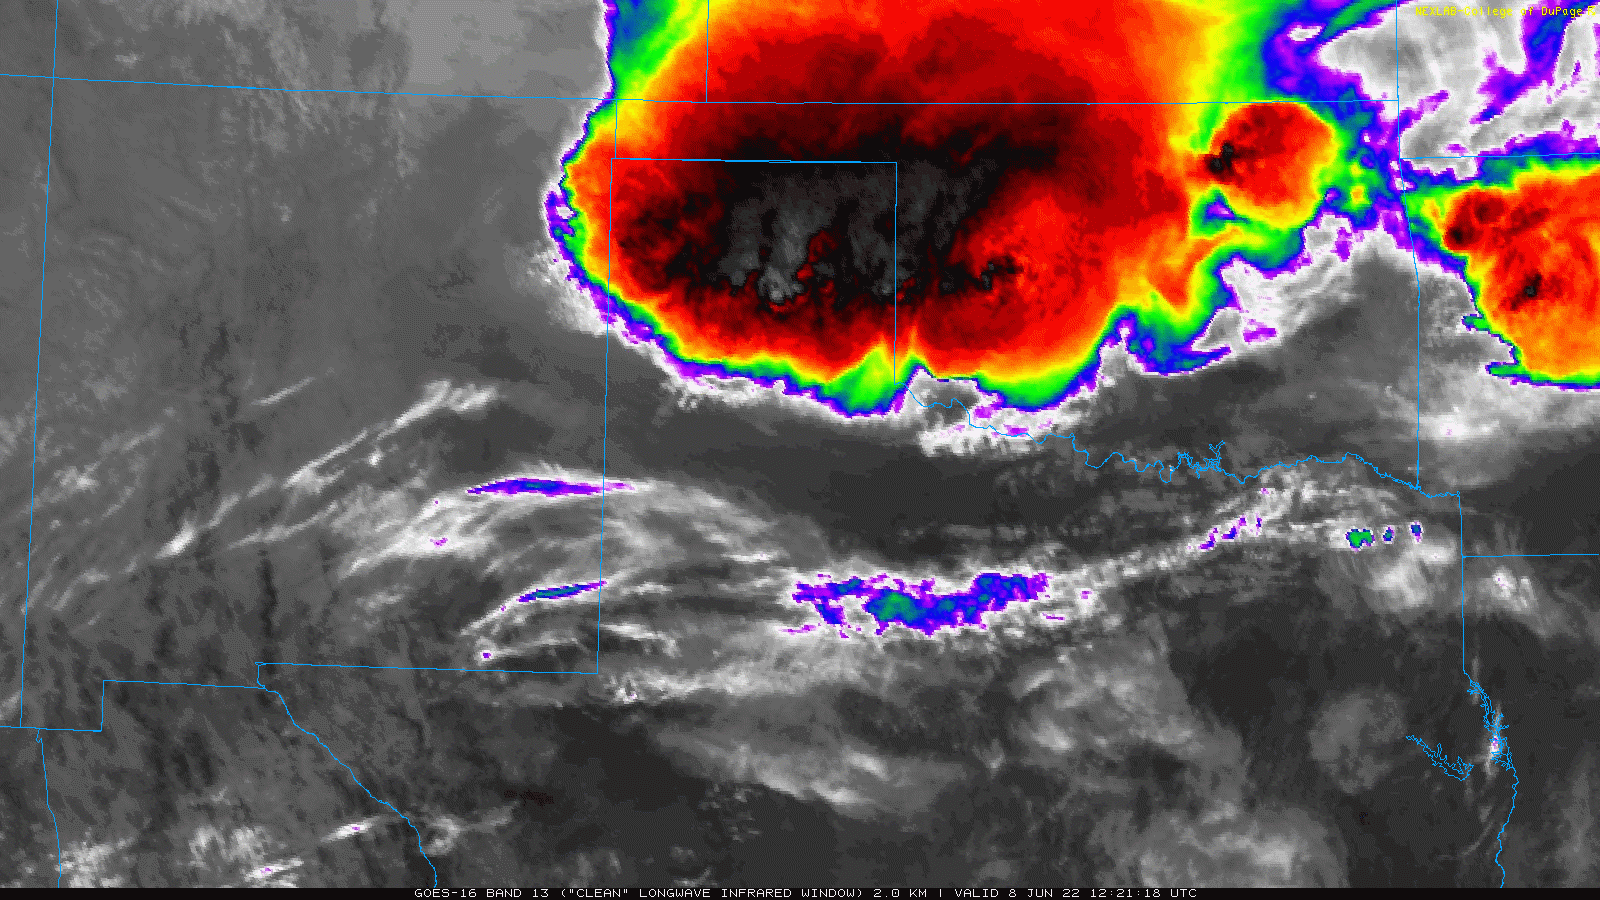 Infrared satellite loop valid from 7:21 am to 8:46 am on Wednesday (8 June 2022).